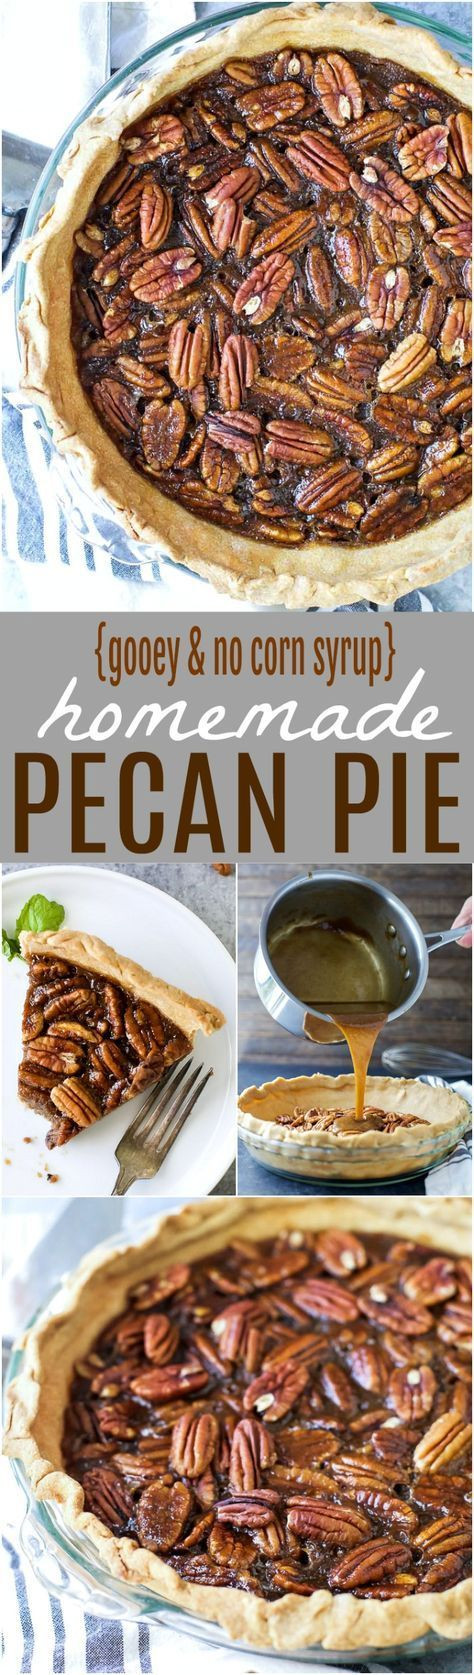 Pecan Pie Without Corn Syrup
 Homemade Pecan Pie no corn syrup Recipe